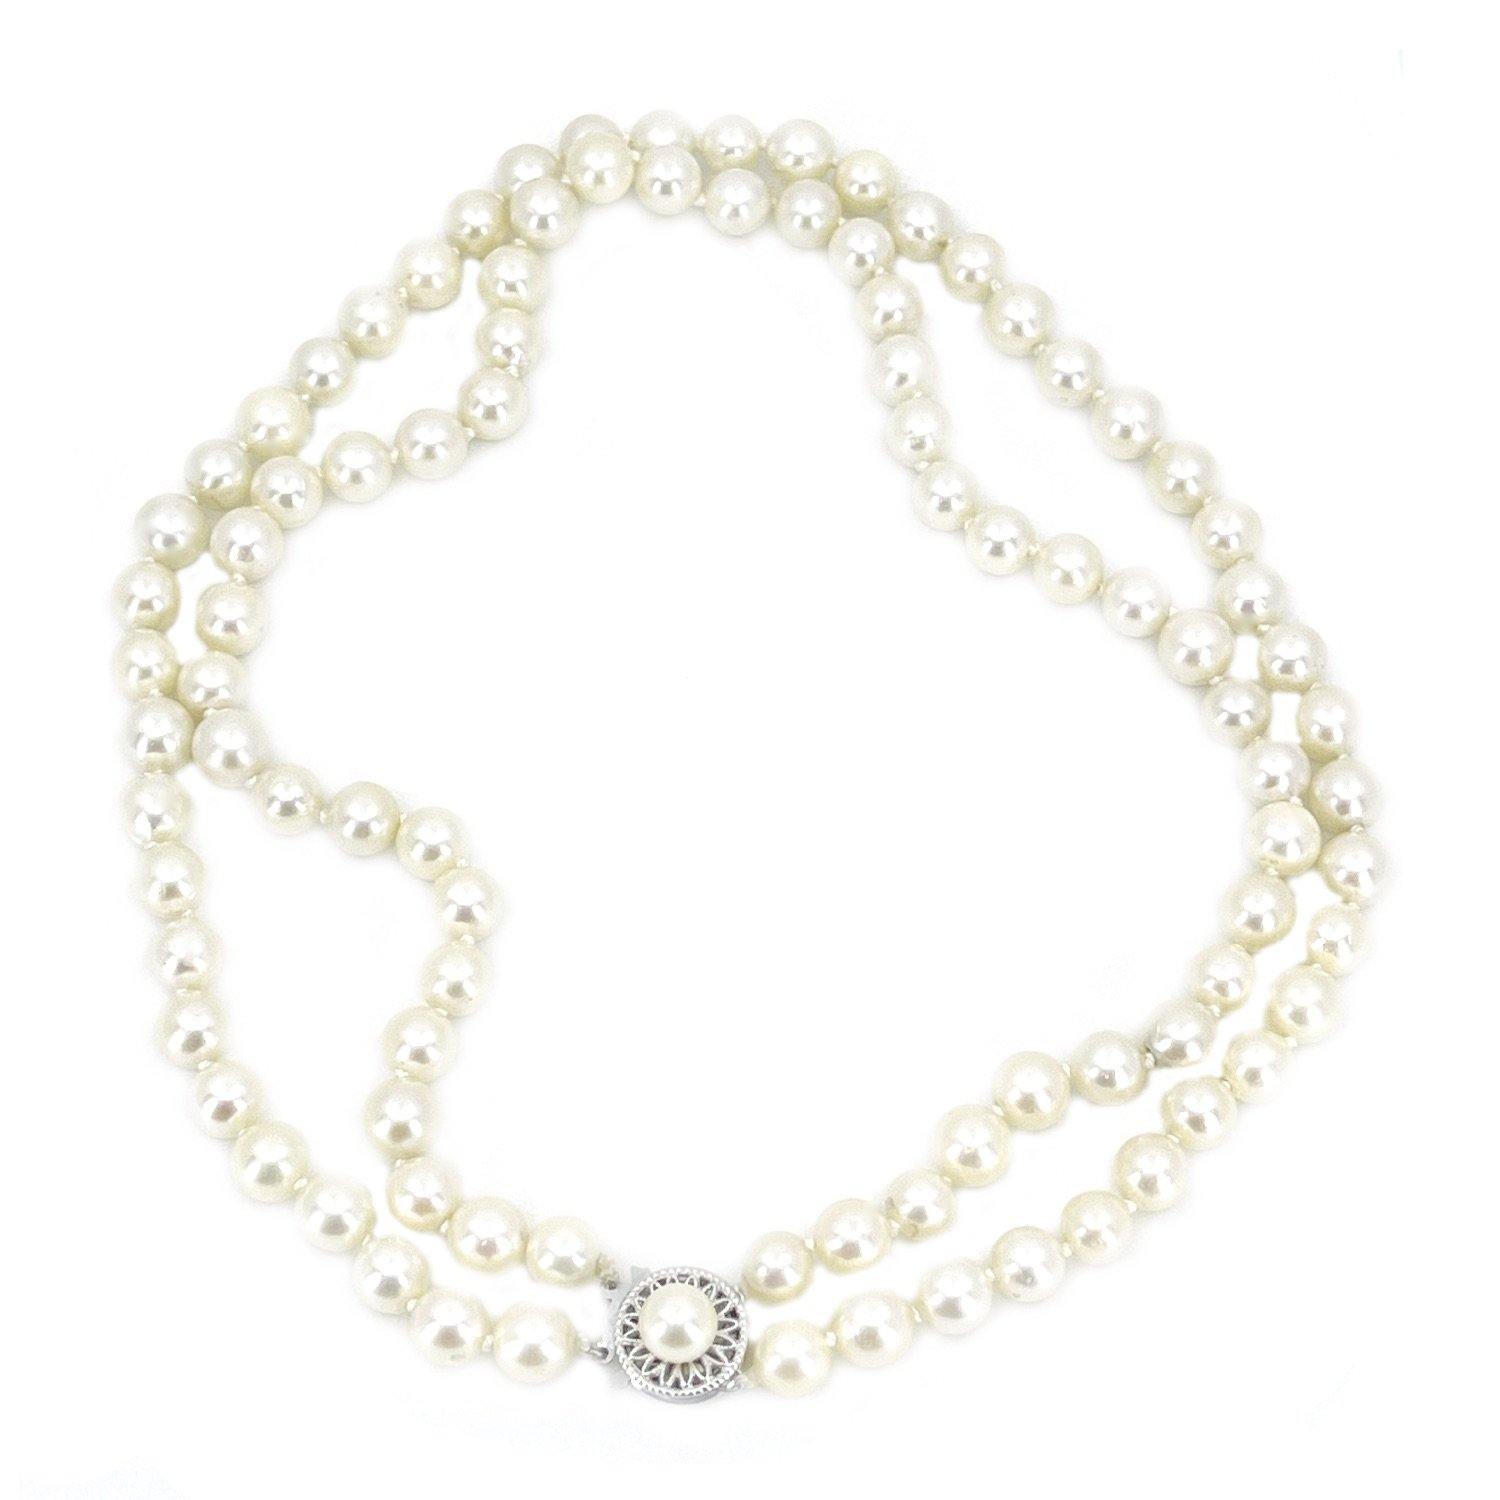 Double Strand Choker Filigree Japanese Saltwater Cultured Akoya Pearl Necklace - 14K White Gold 15 & 15.25 Inch